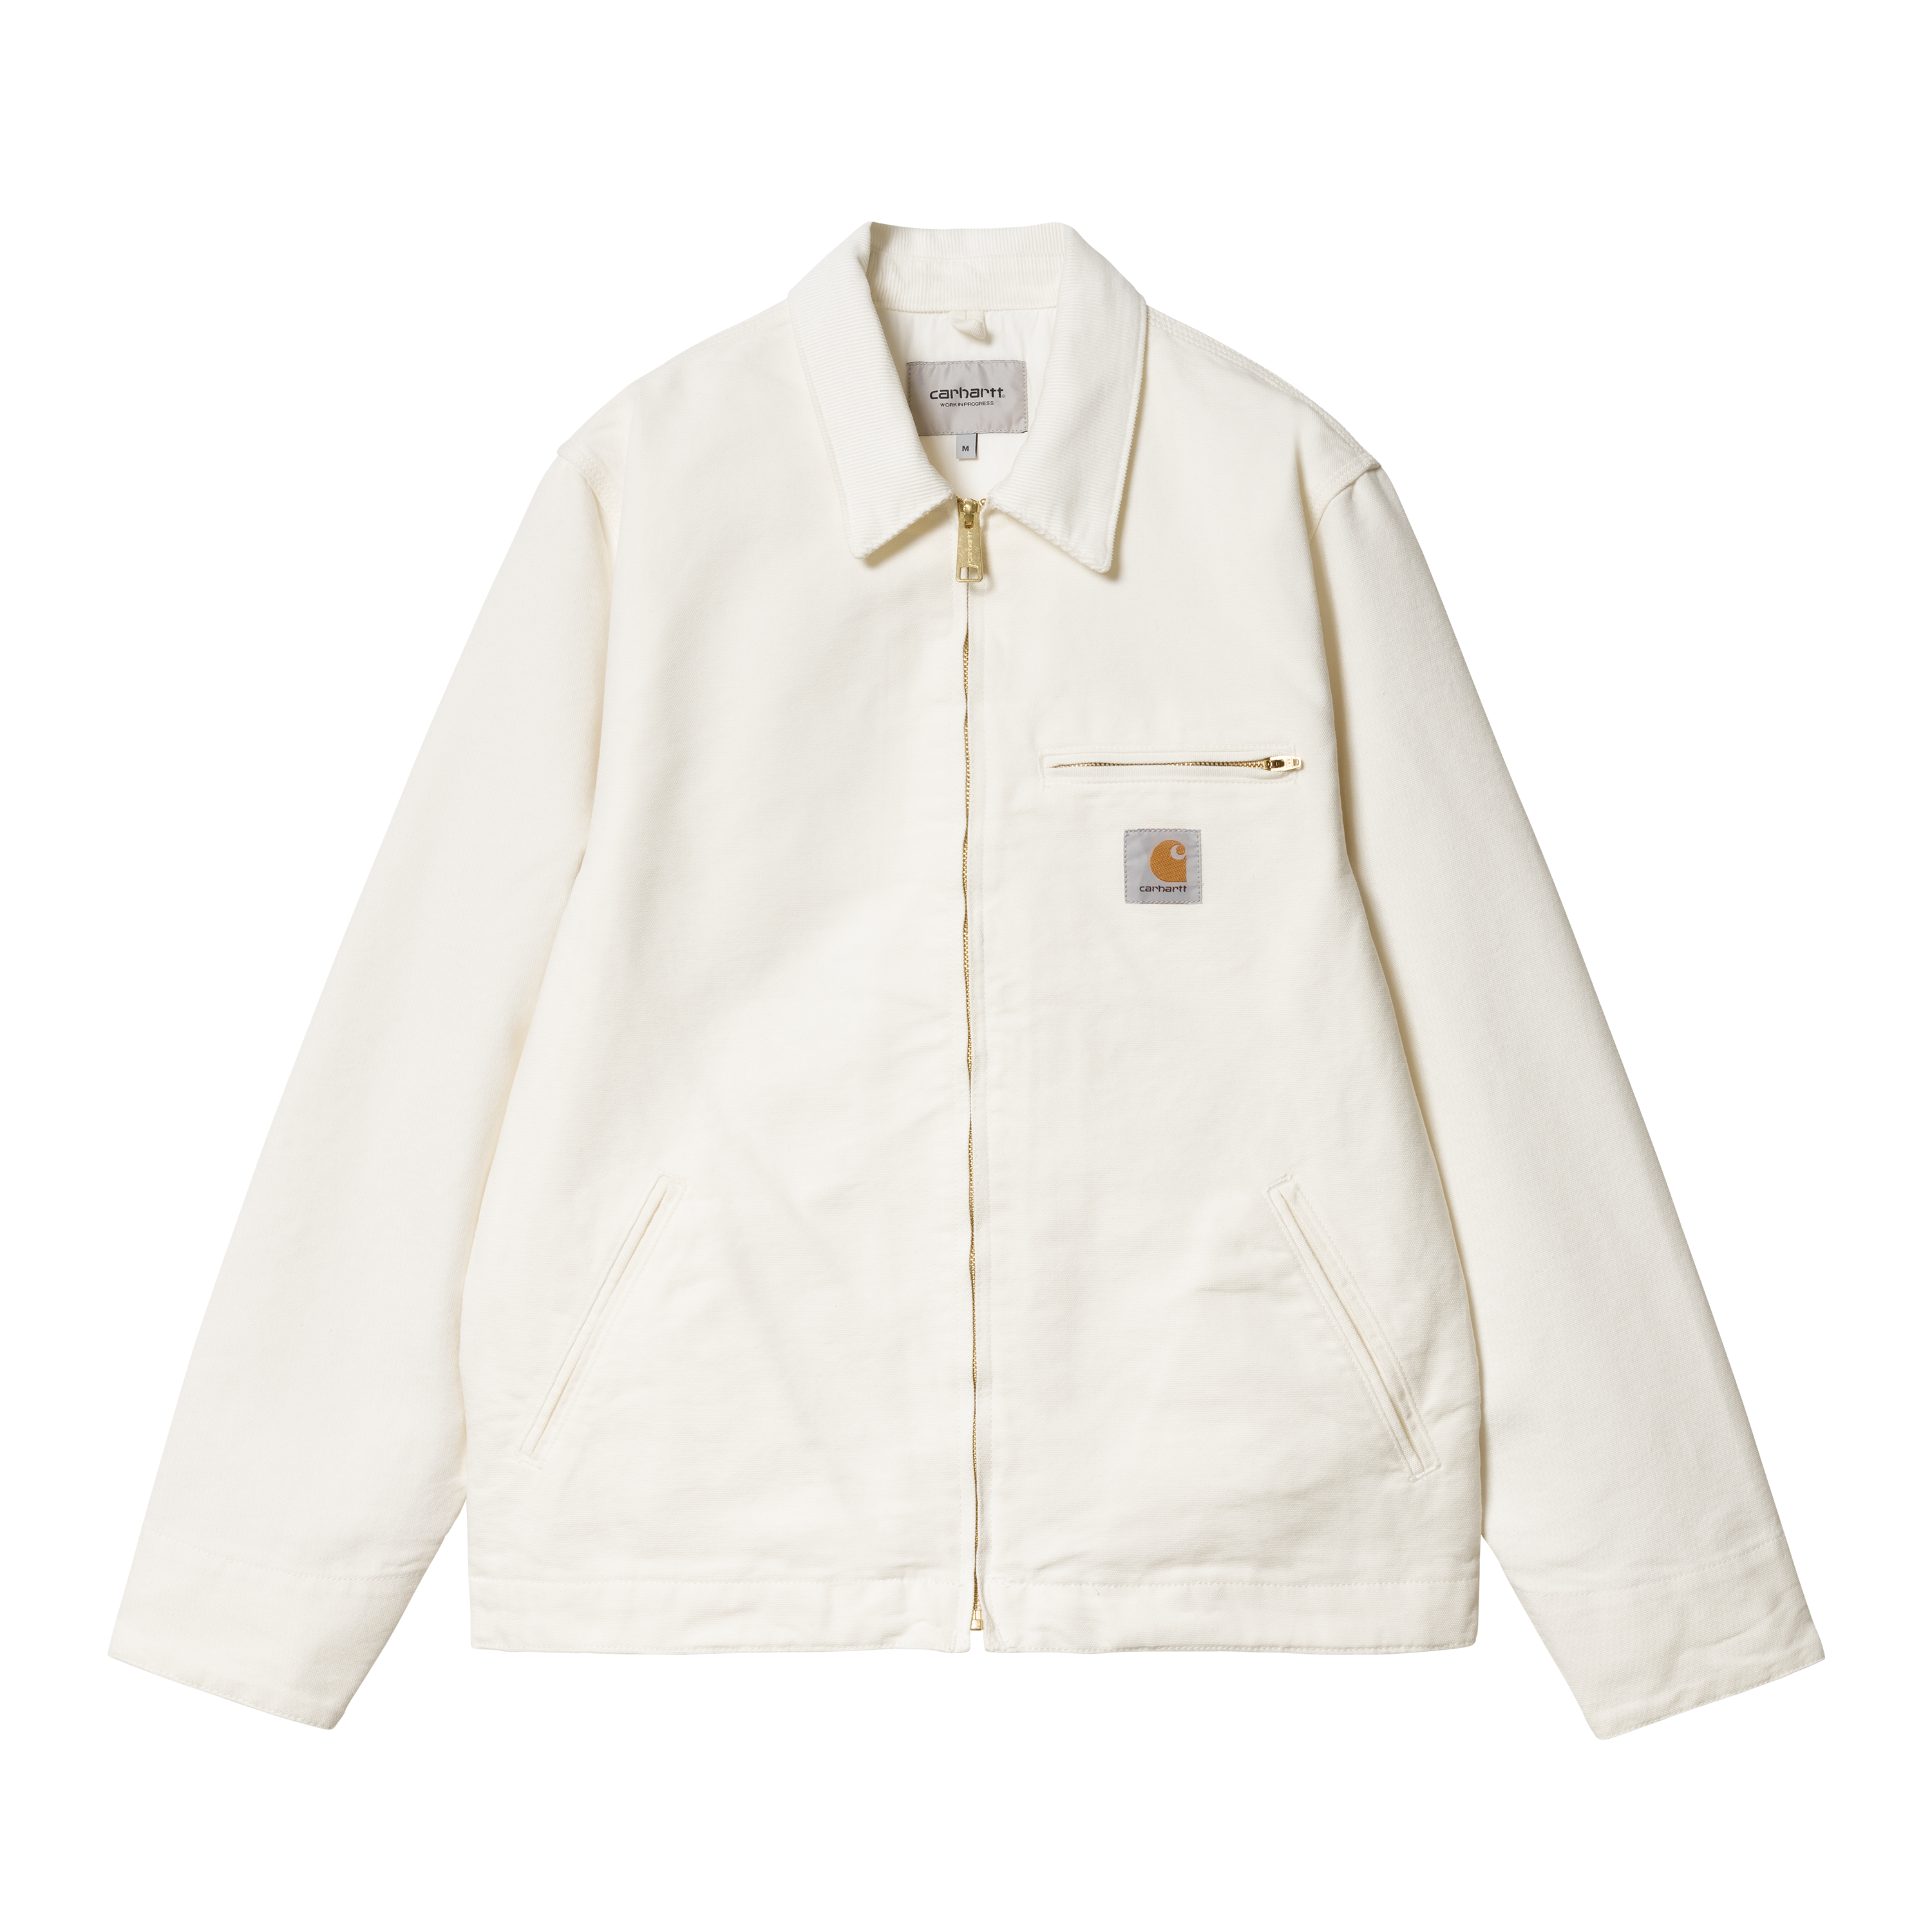 Shop Carhartt WIP Active Organic Dearborn Jacket (wax stone washed) online